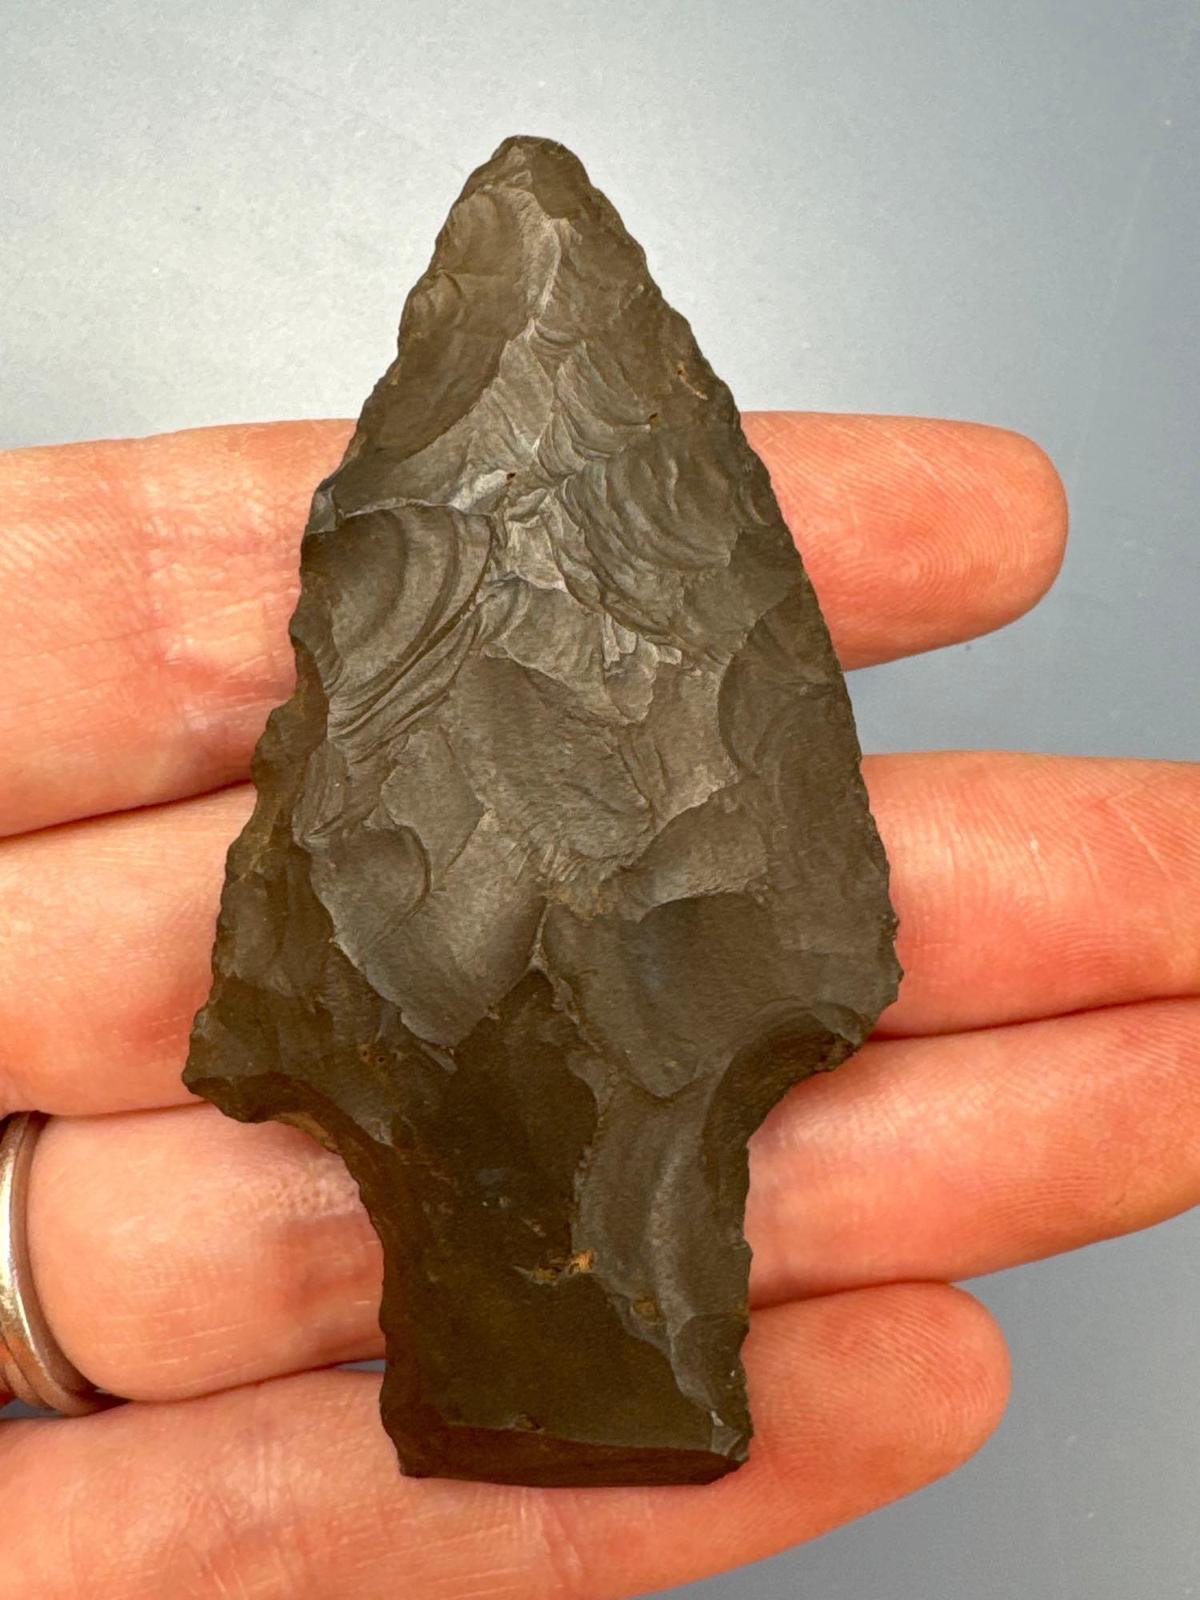 2 3/8" Esopus Chert Stemmed Point, Found in a Field next to the Conn. River in East Windsor, CT, Ex